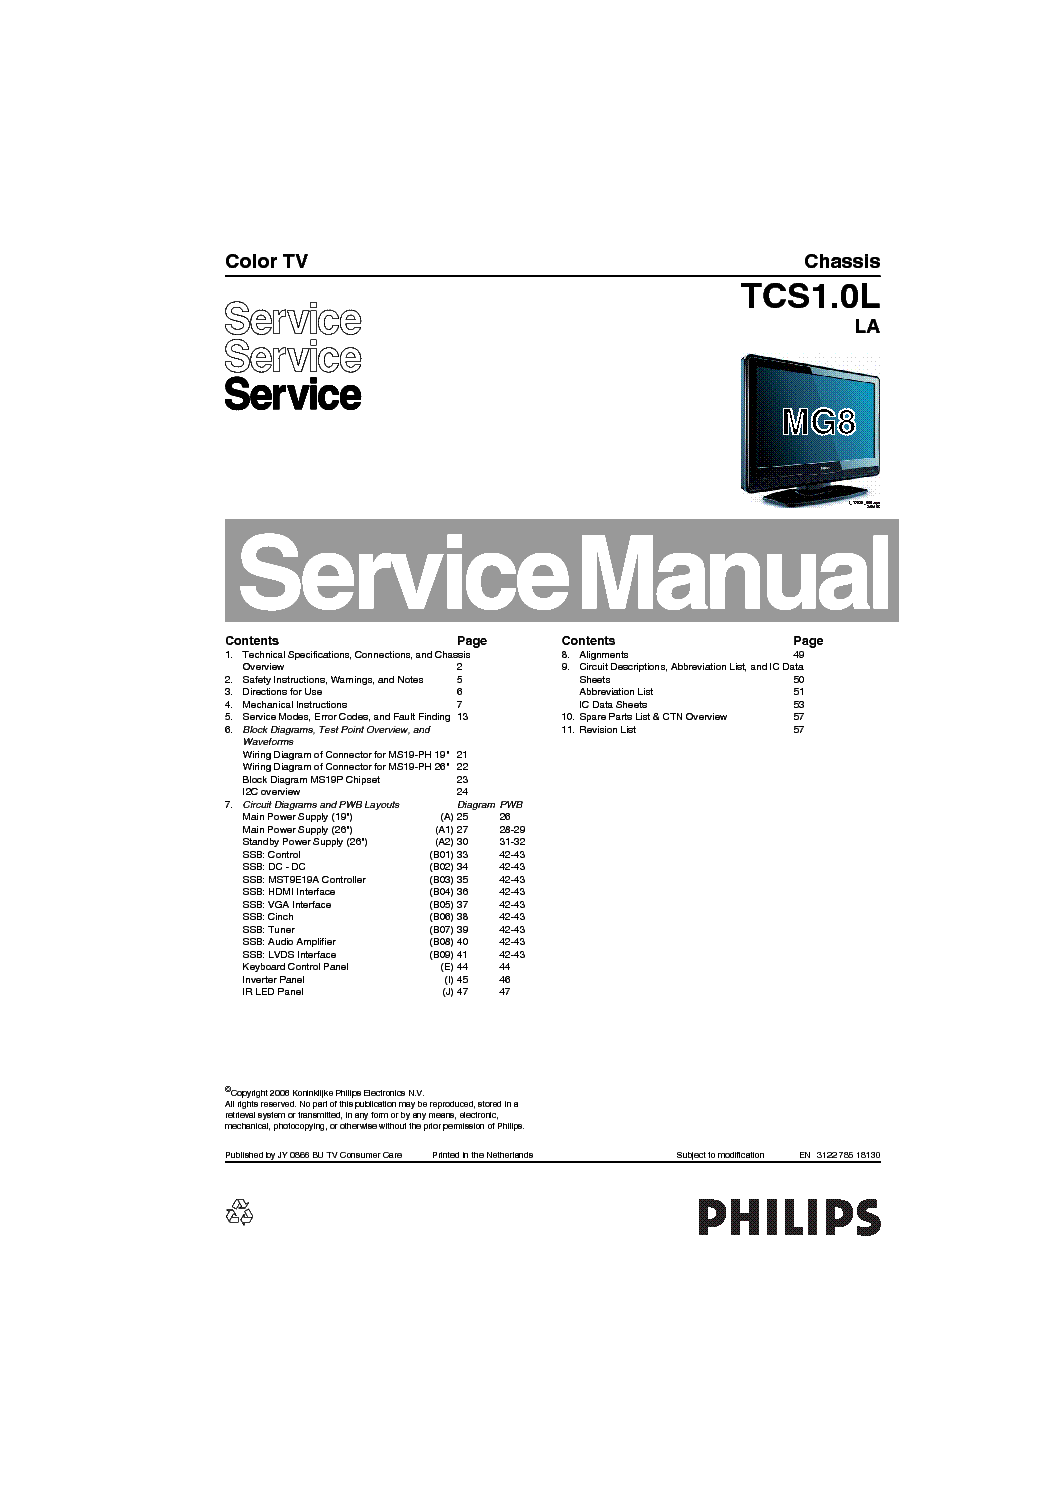 PHILIPS CHASSIS TCS1.0L-LA SM service manual (1st page)